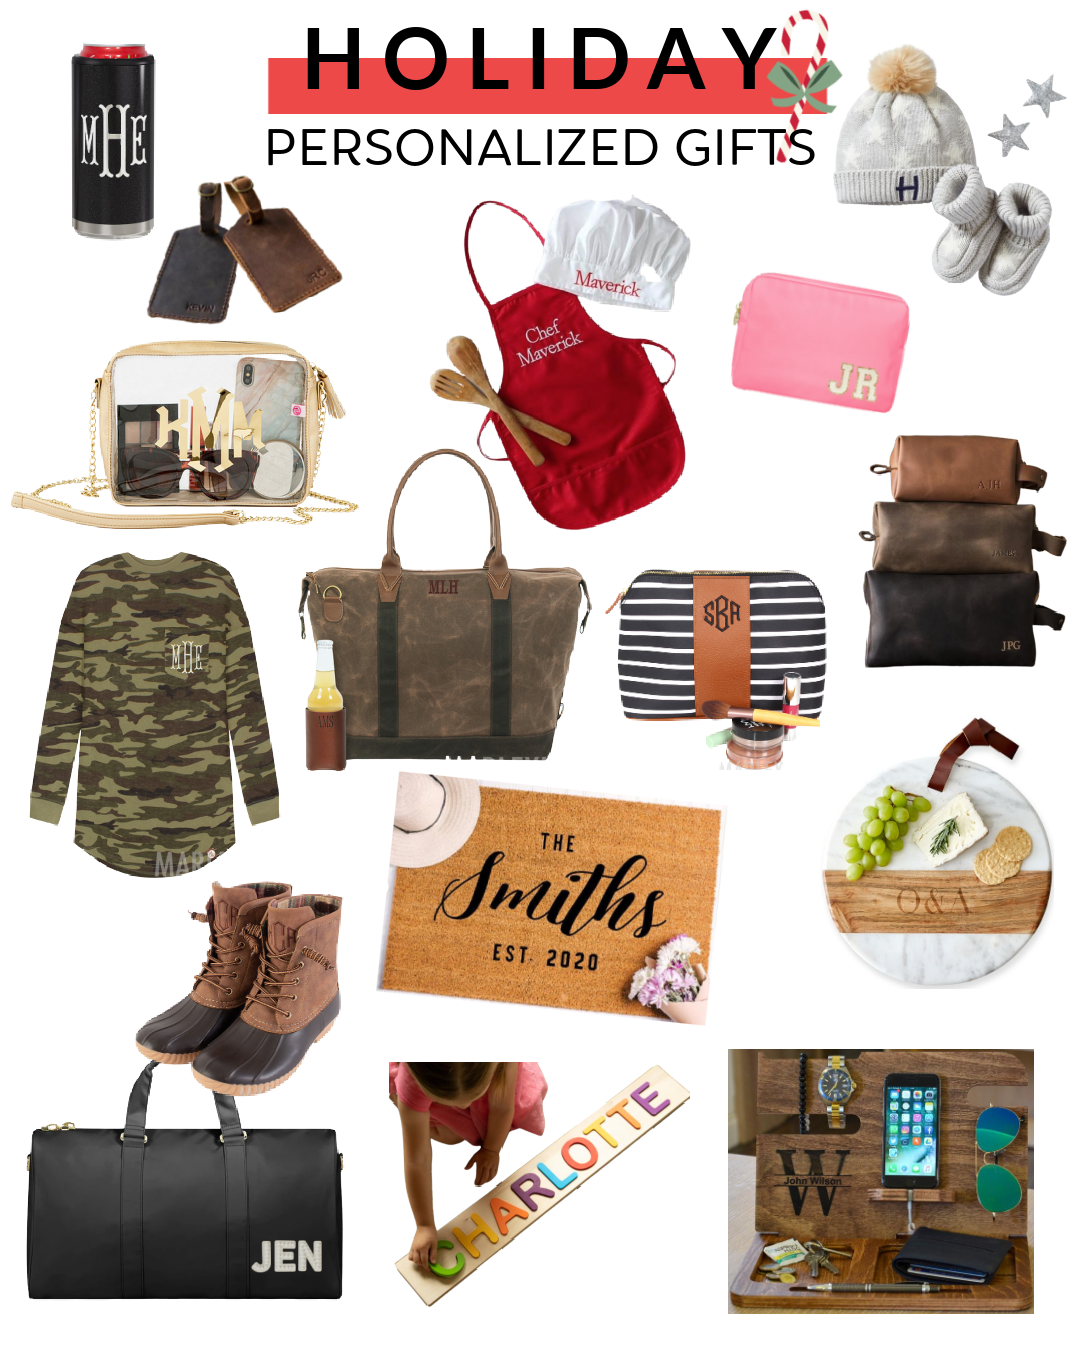 2020 Gift Guides - The Sister Studio